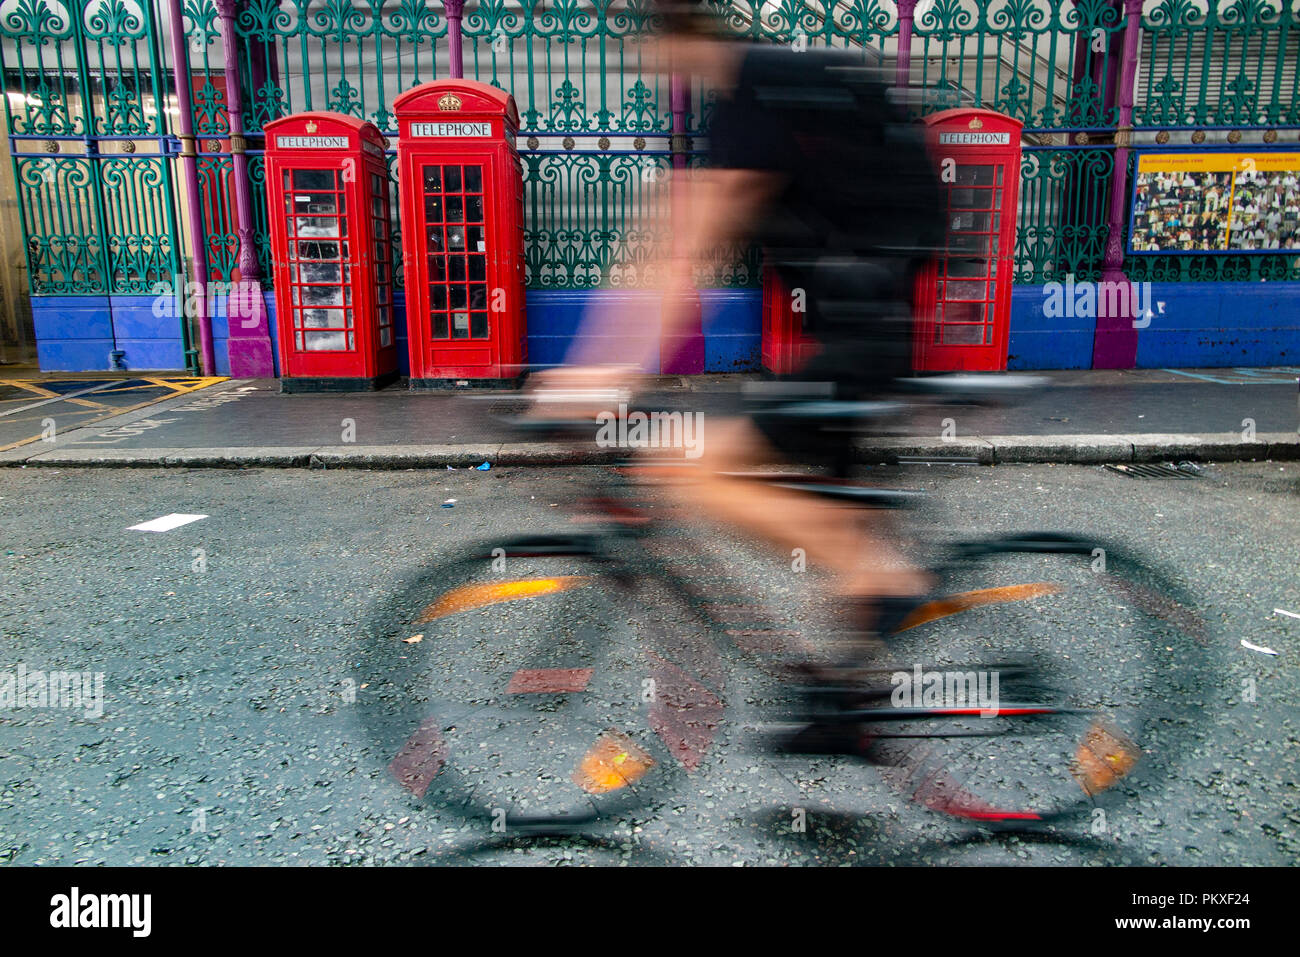 Iconic telephone boxes in an iconic location in the City of London with a blurred cyclist passing by Stock Photo